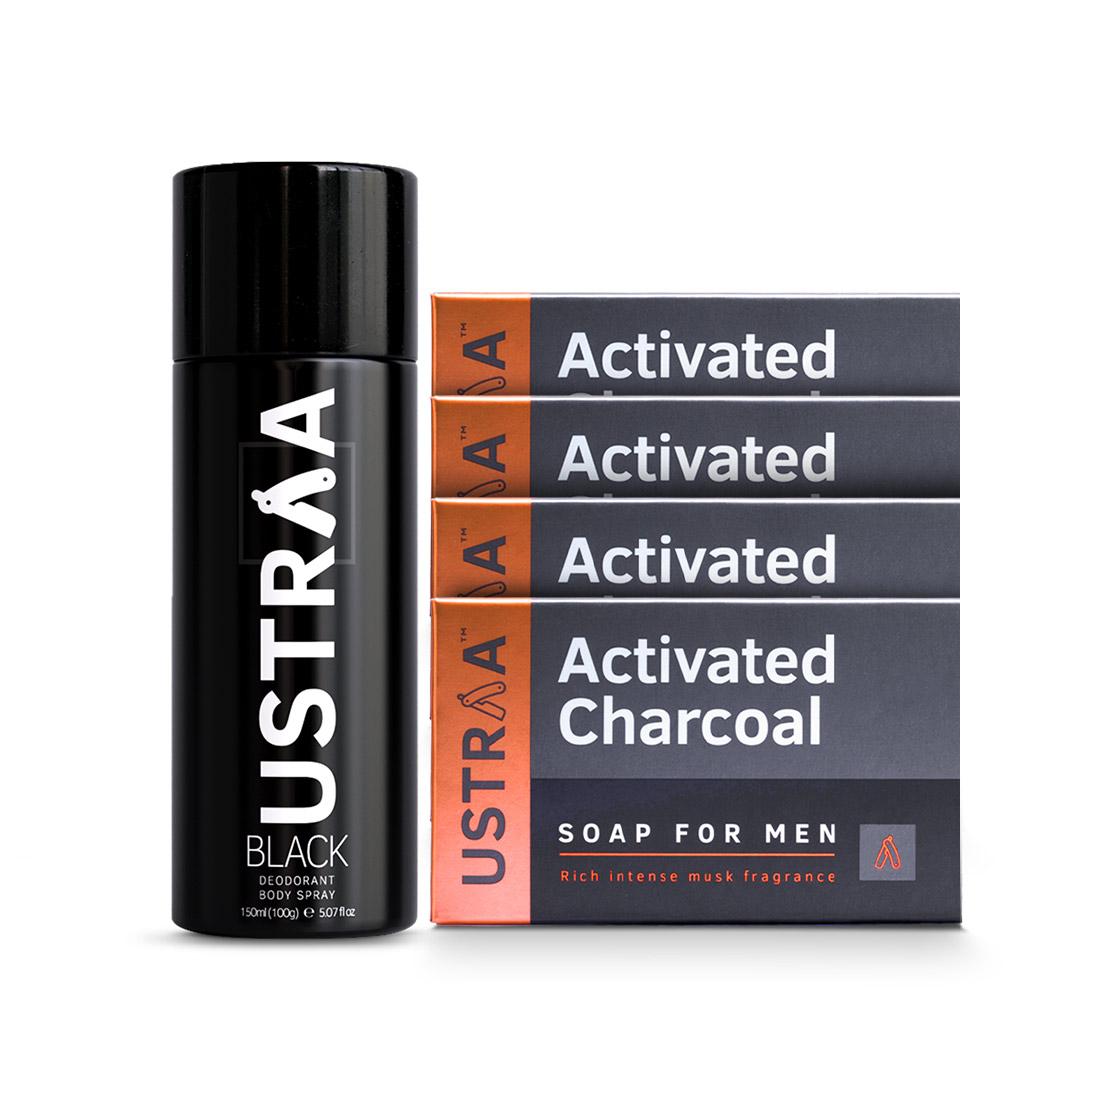 Ustraa Deodorant Black and Deo Soap Activated Charcoal (Set of 4) | Fragrance Combo